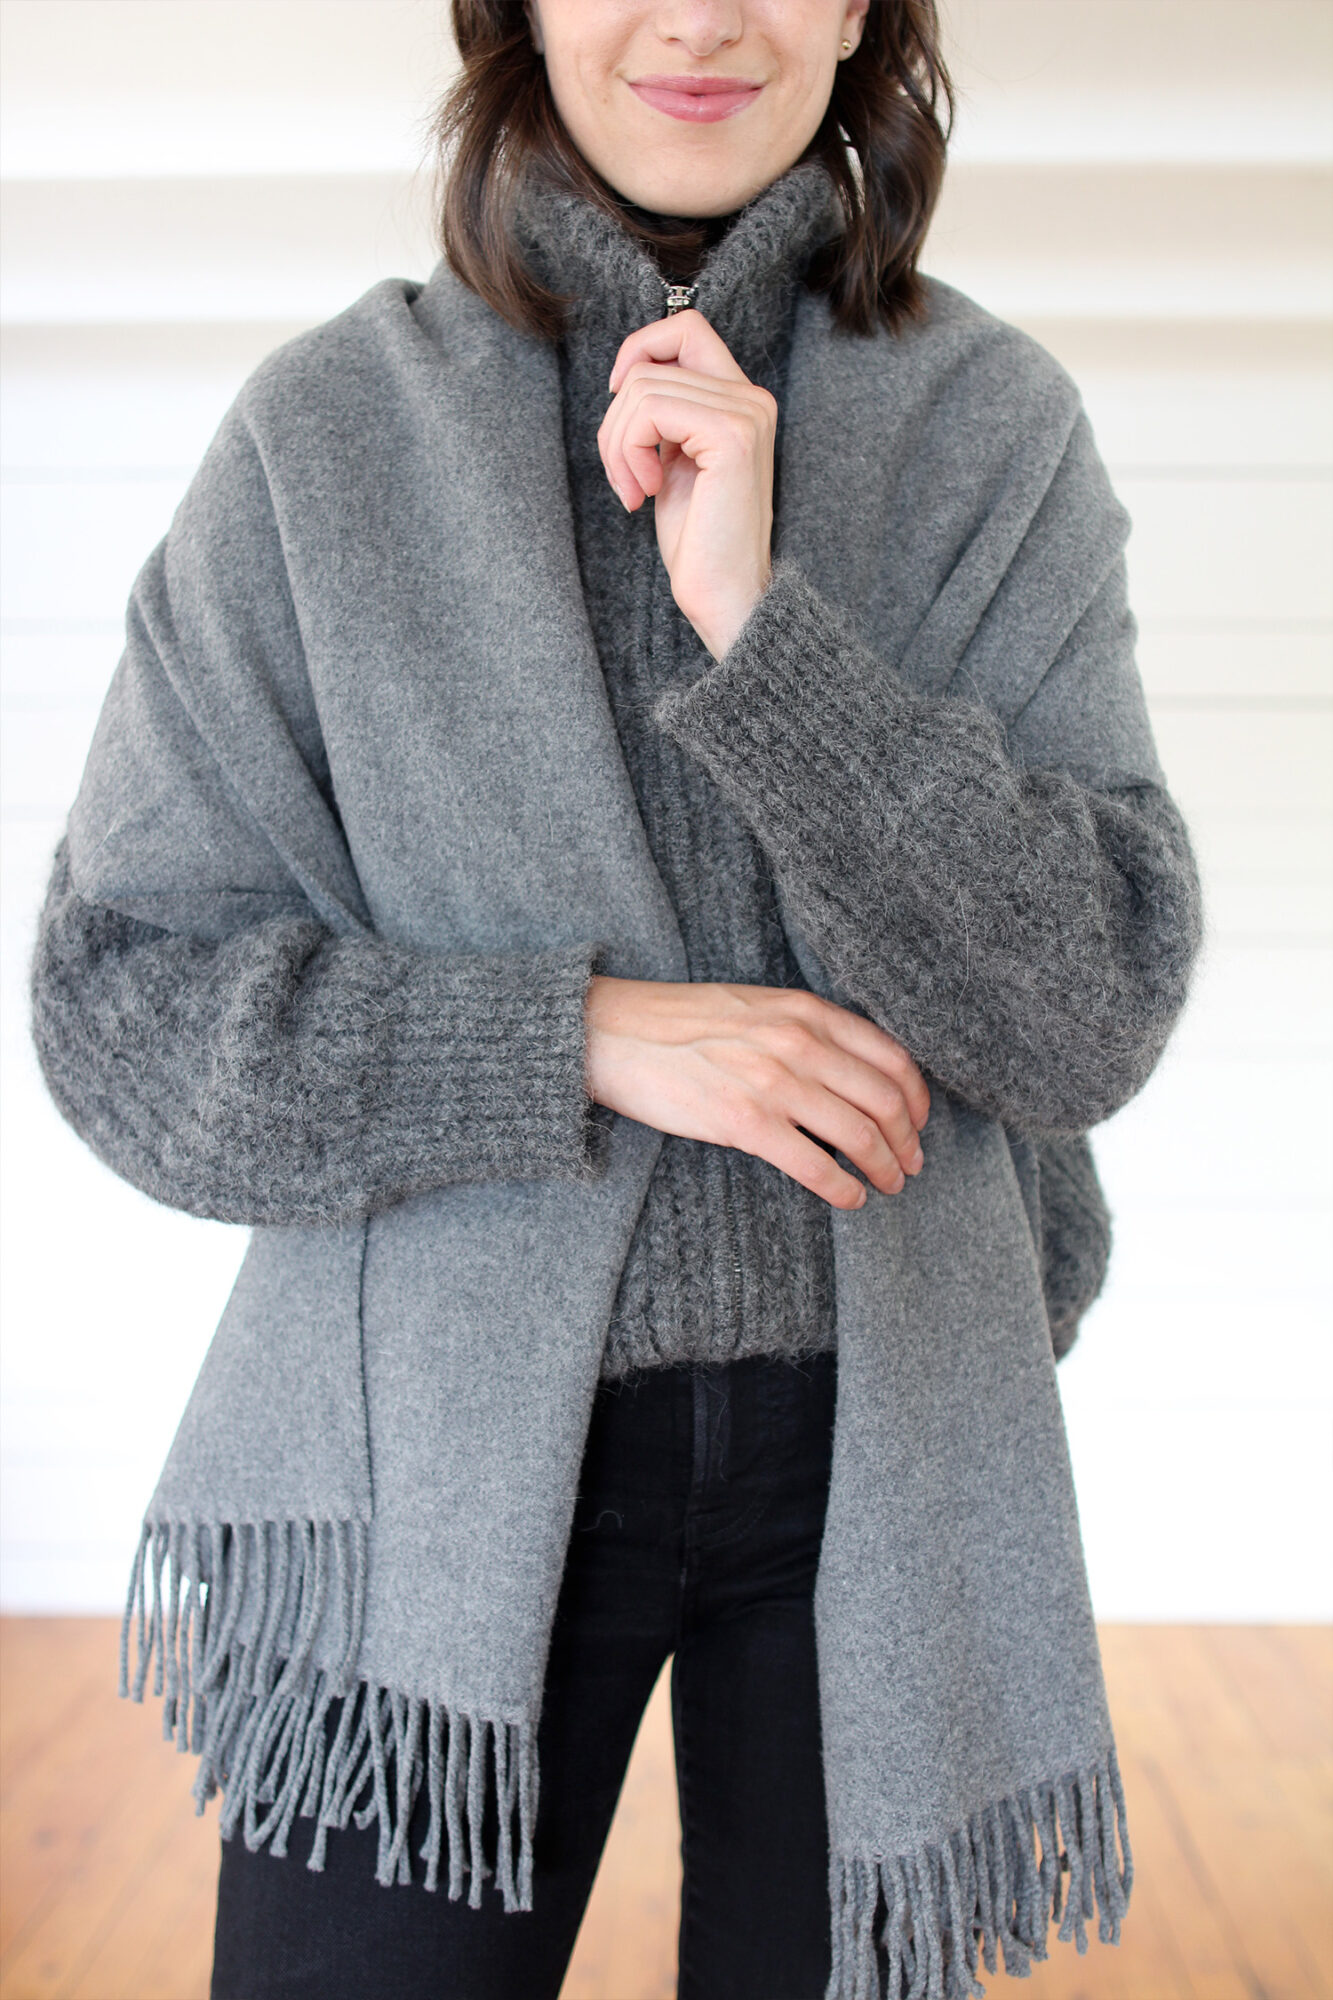 Style Bee - The Makings of a Modern Heirloom with Bare Knitwear